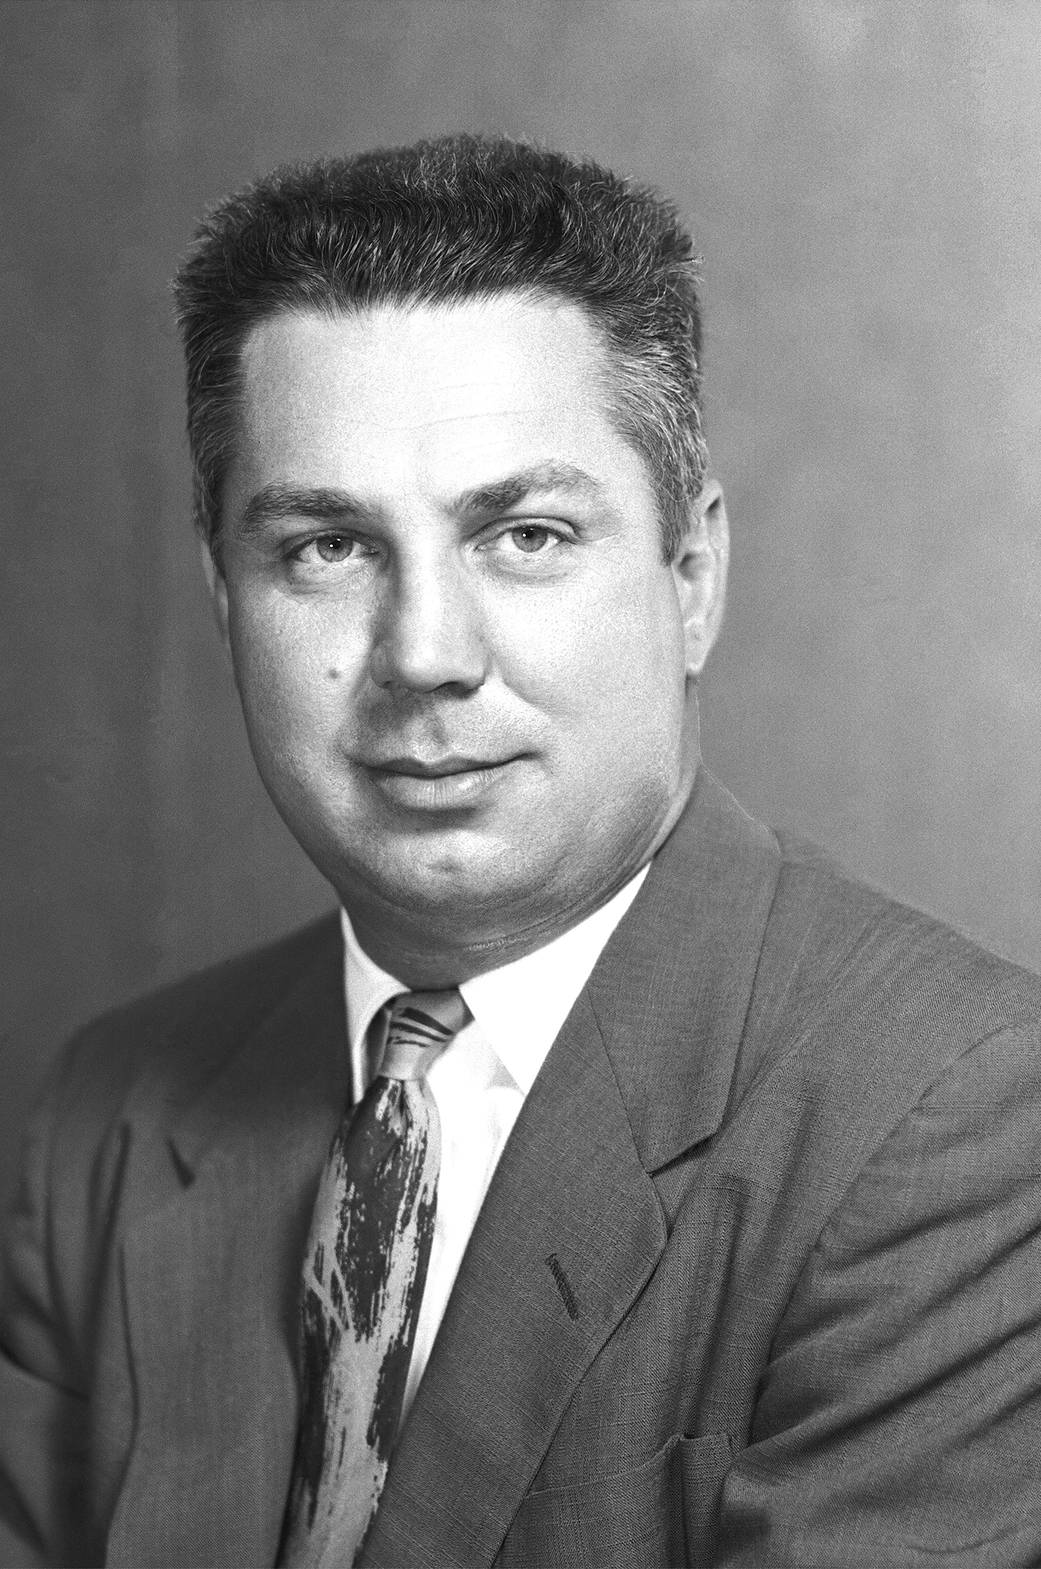 Black and white portrait of former Center Director Walter Williams